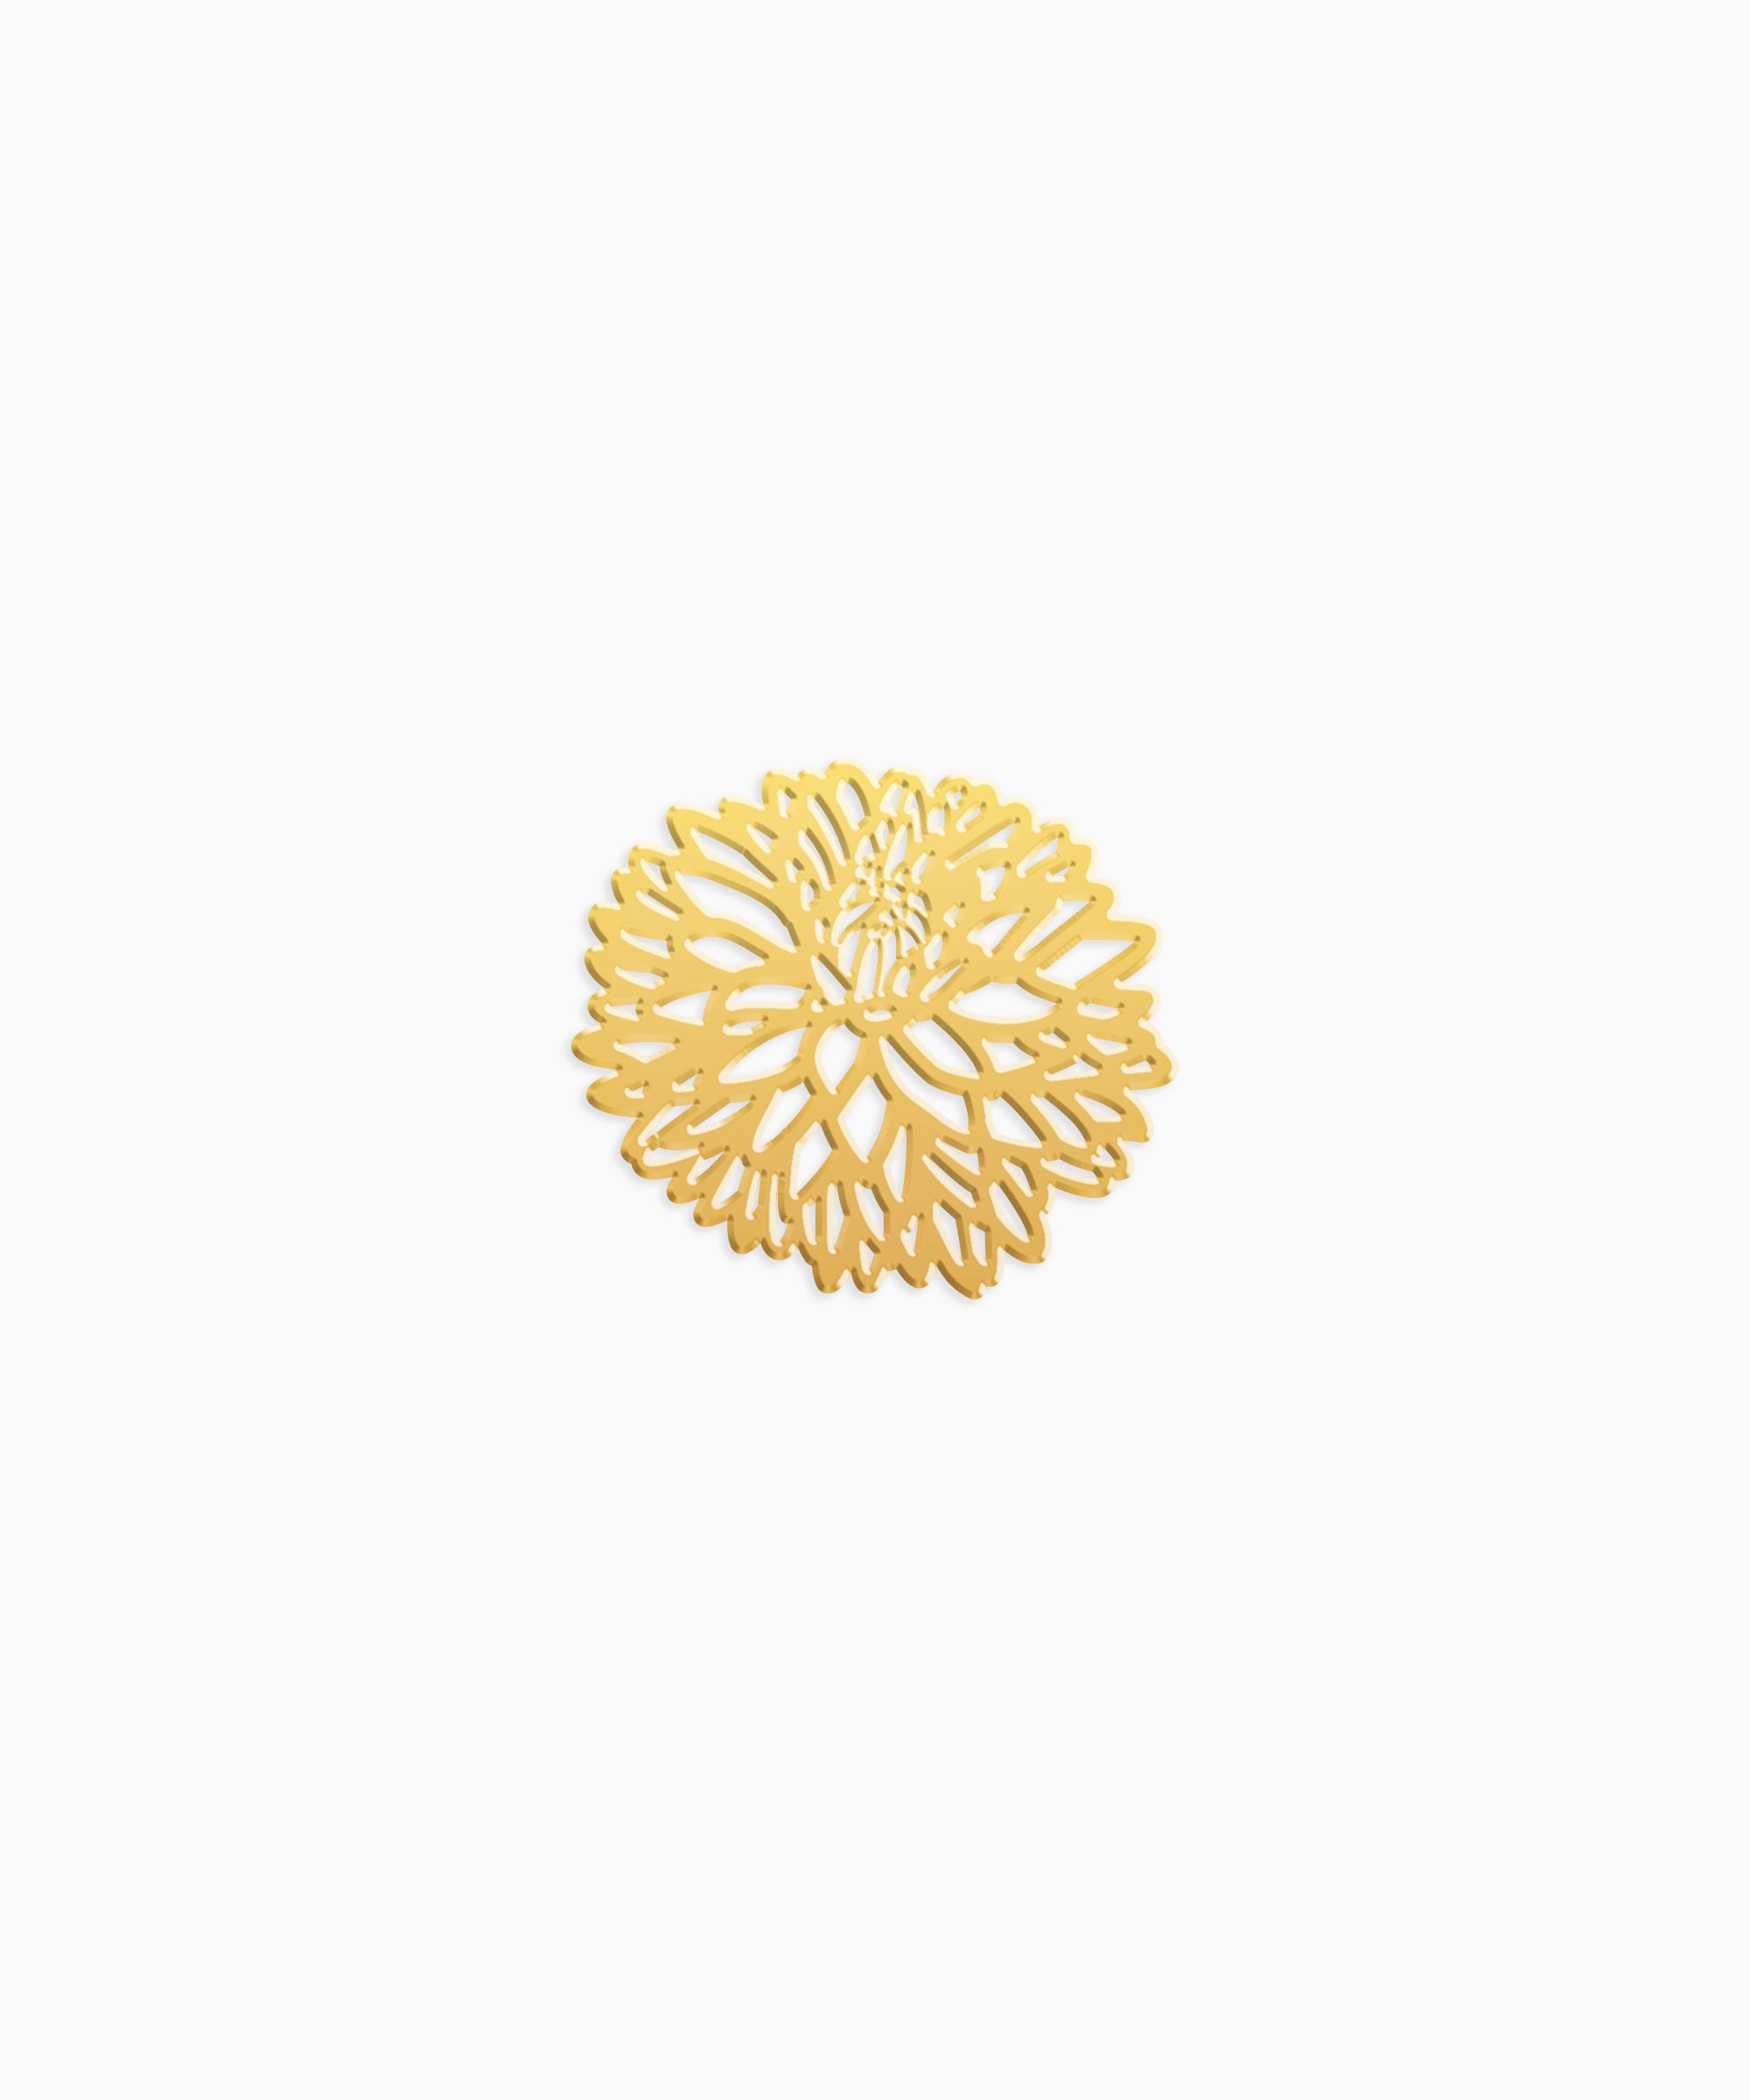 Chrysanthemum Charm - High Quality, Affordable, Whimsical, Hand Drawn Individual Charms for a Custom Locket - November Birthday Gift - Available in Gold and Silver - Made in USA - Brevity Jewelry